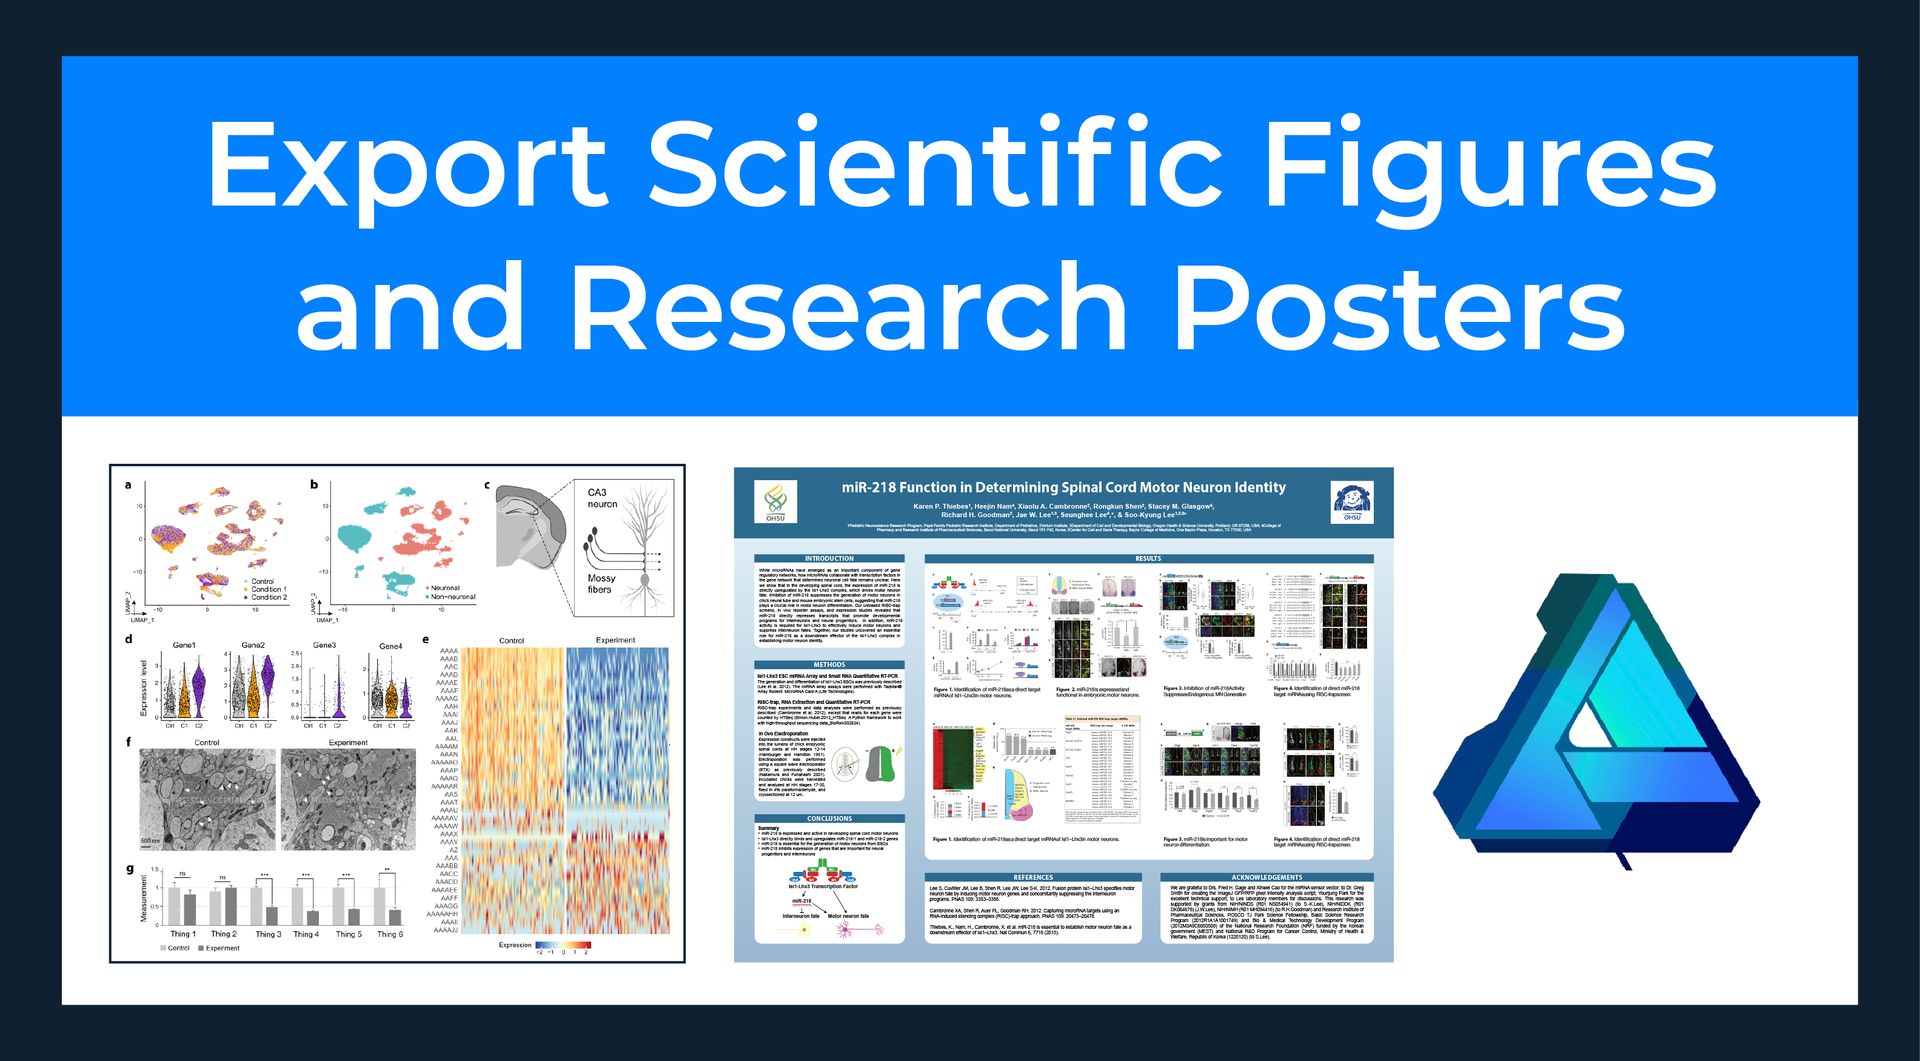 Examples of research poster and figure for science papers